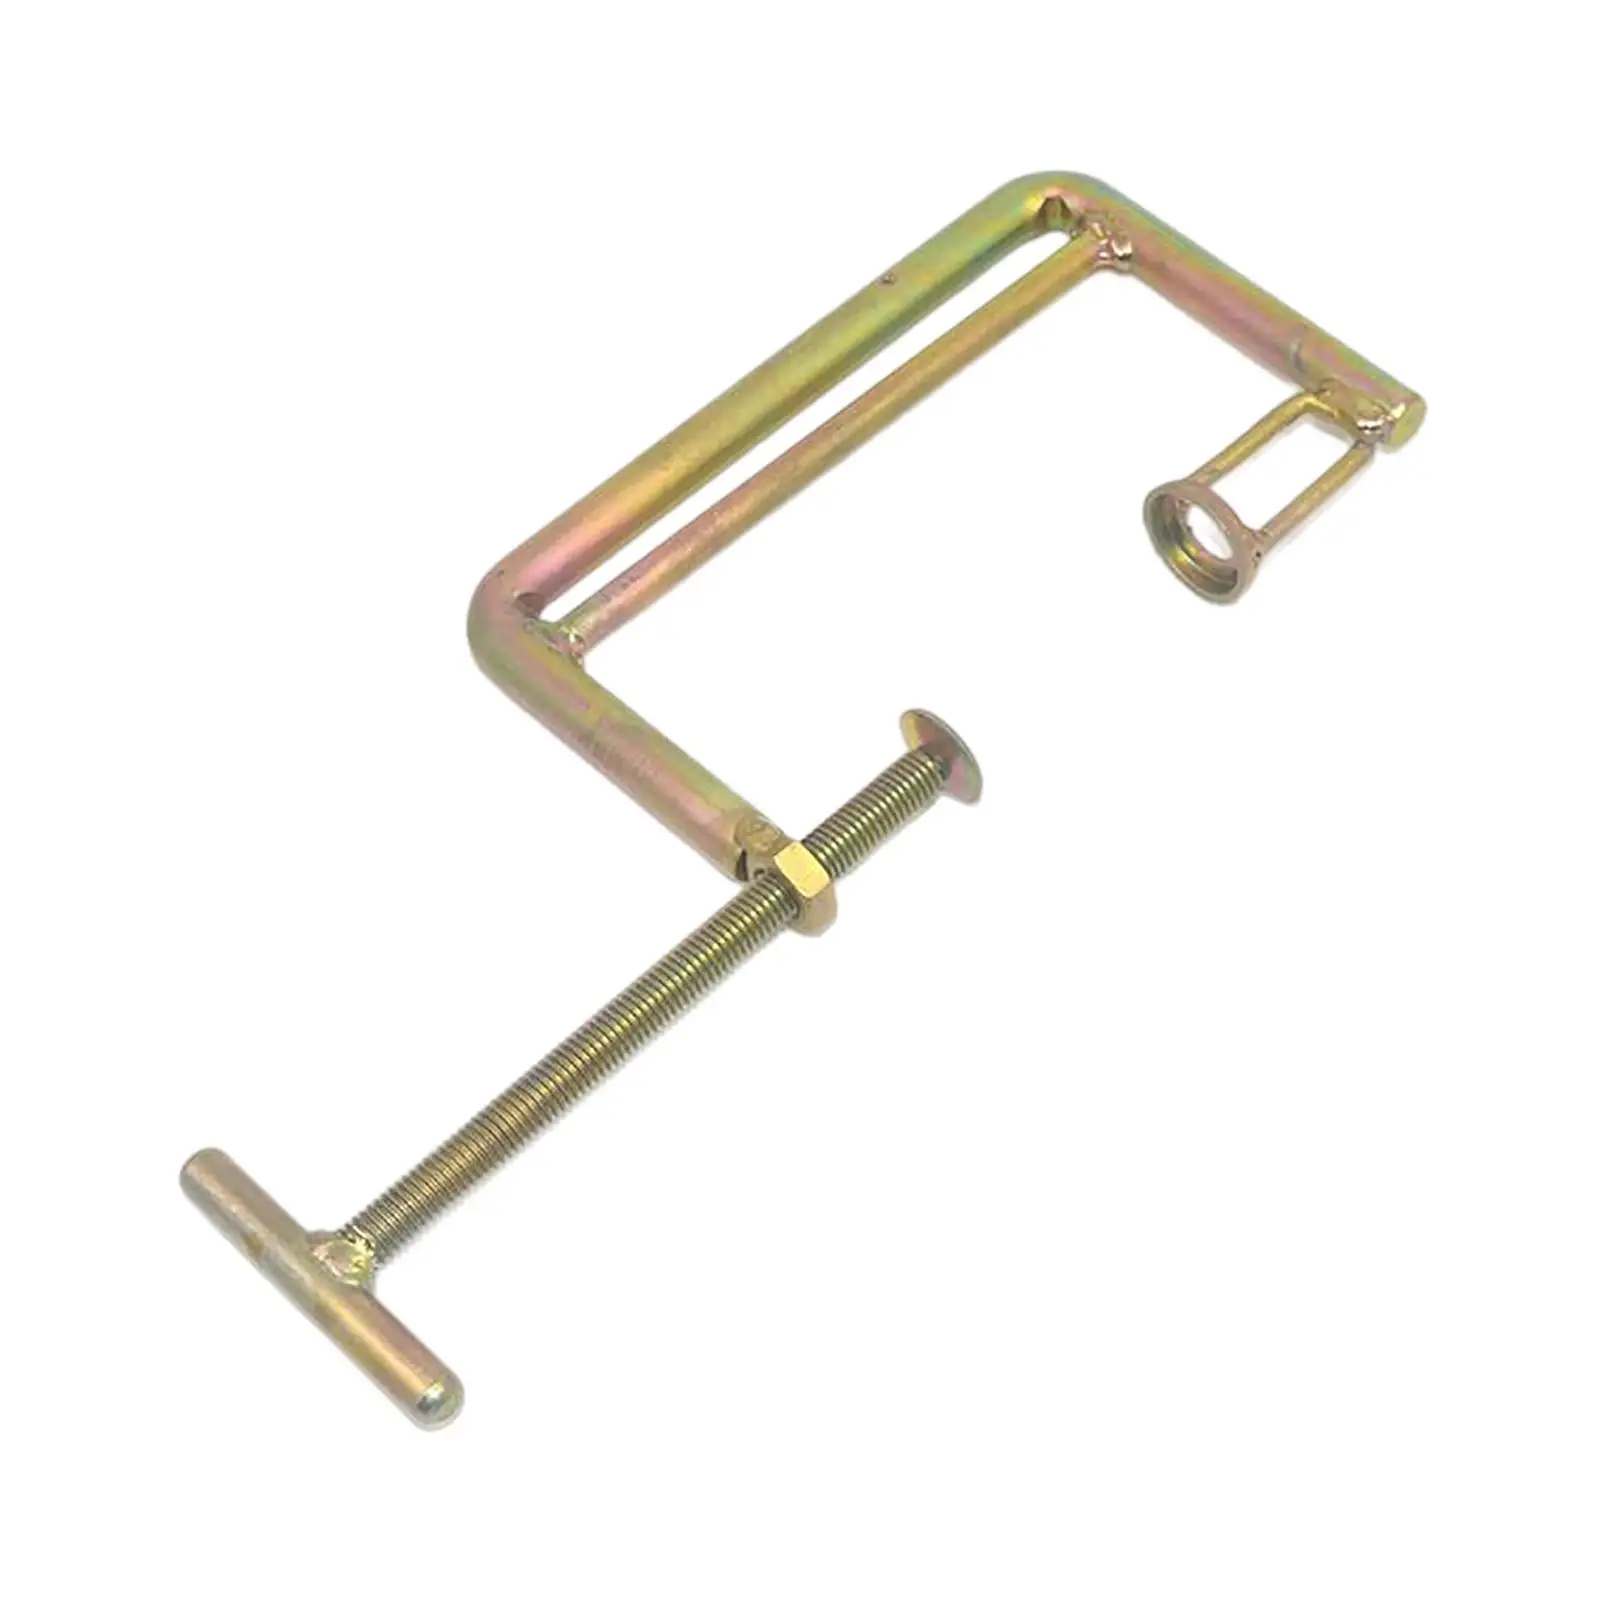 Valve Spring Clamps Sturdy Aluminum Alloy Compressor C Clamp Car Repair Tool for Small Engines Engine Parts Car Accessories